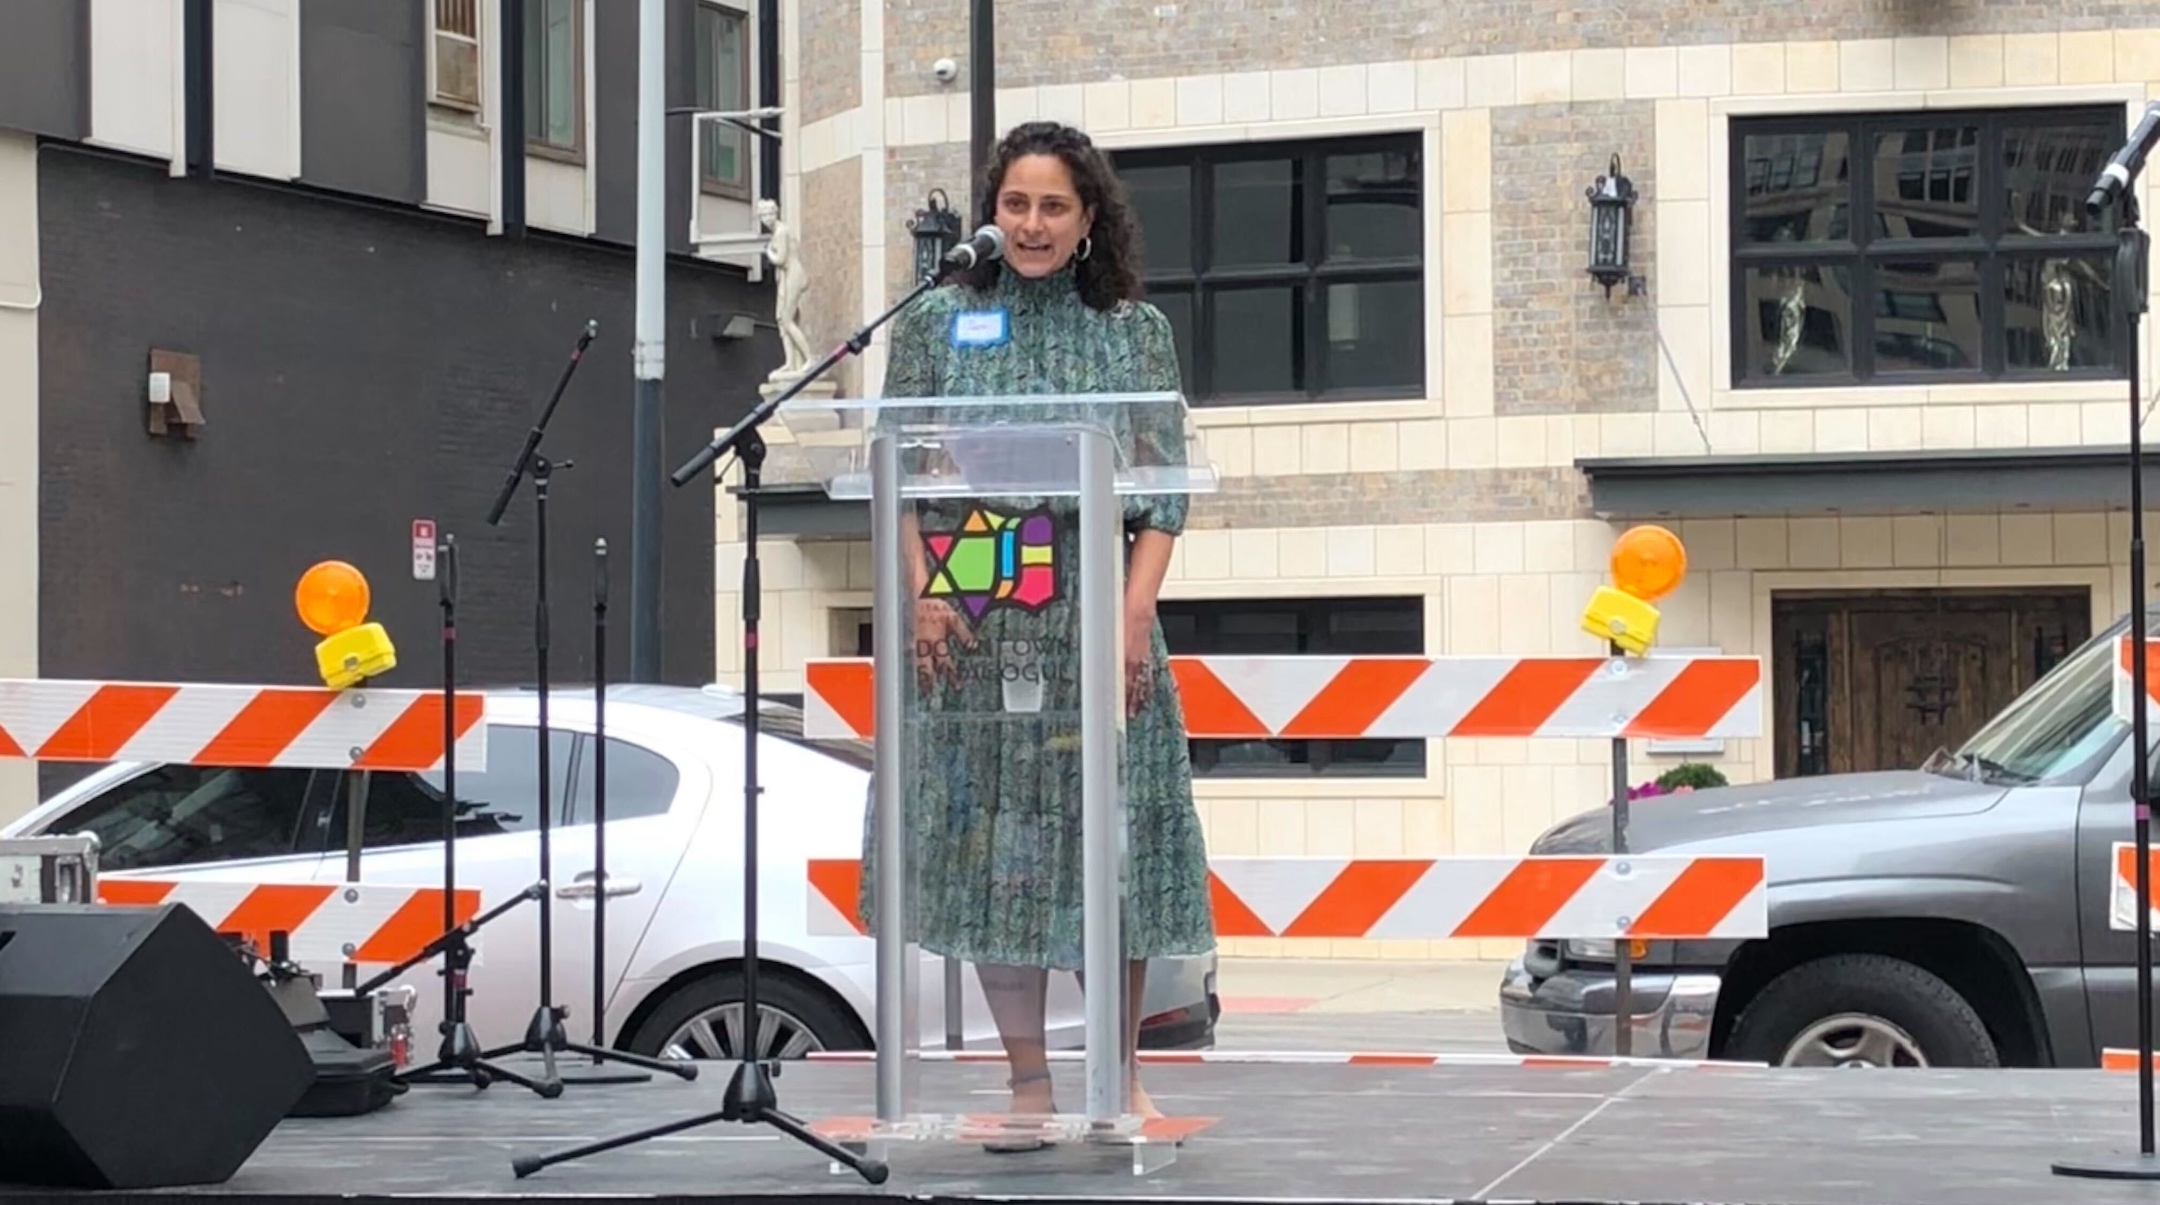 Samantha Woll, president of the Isaac Agree Downtown Synagogue in Detroit, welcomes attendees to the congregation’s centennial celebration and groundbreaking on a major renovation project, Aug. 14, 2022. (Andrew Lapin/Jewish Telegraphic Agency)